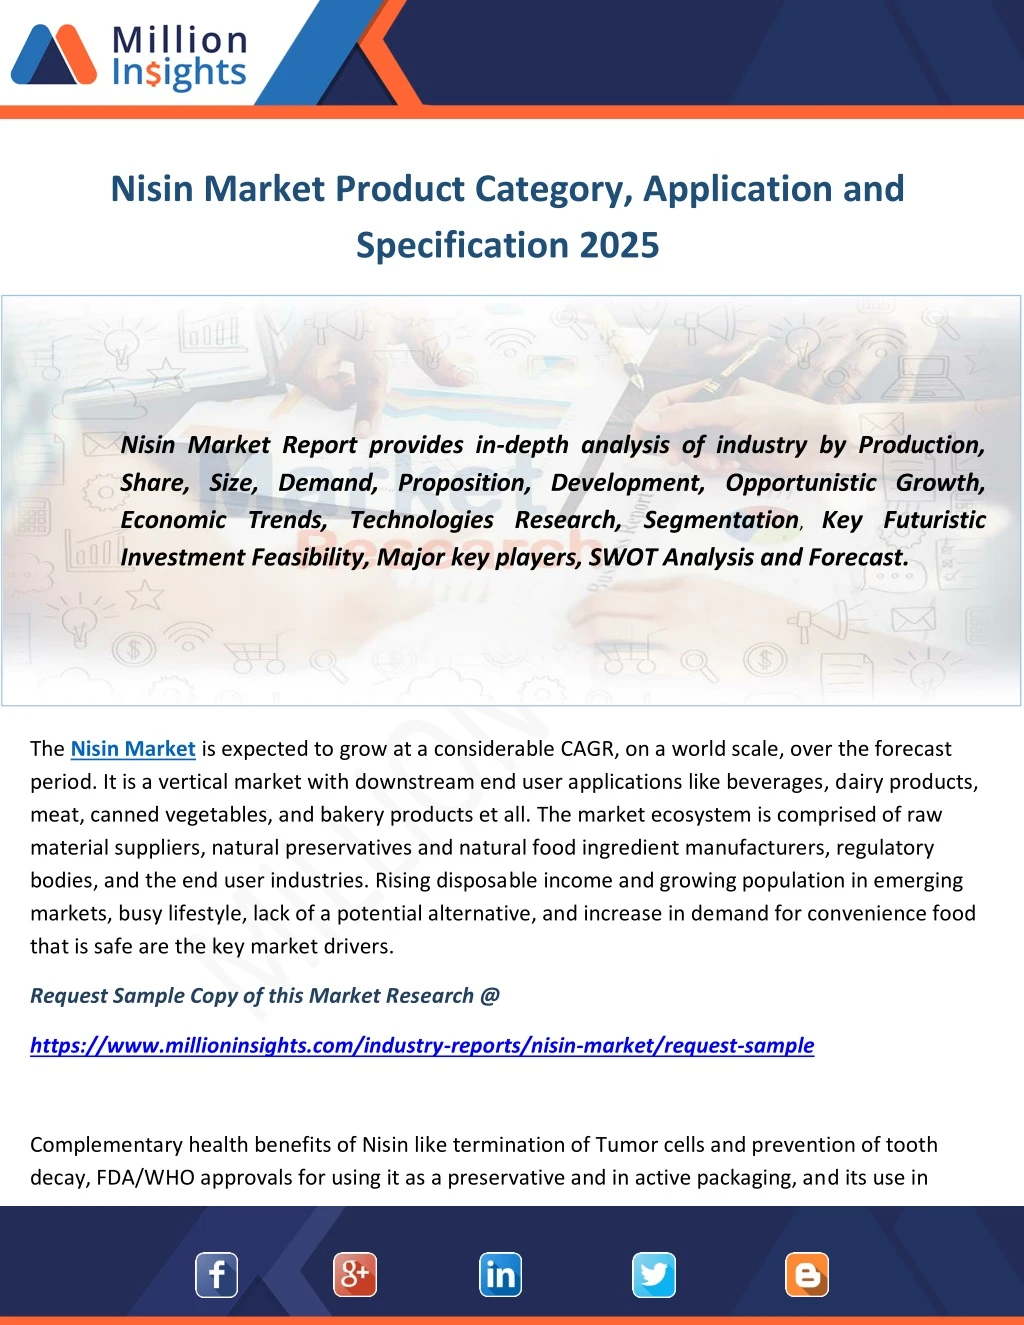 nisin market product category application